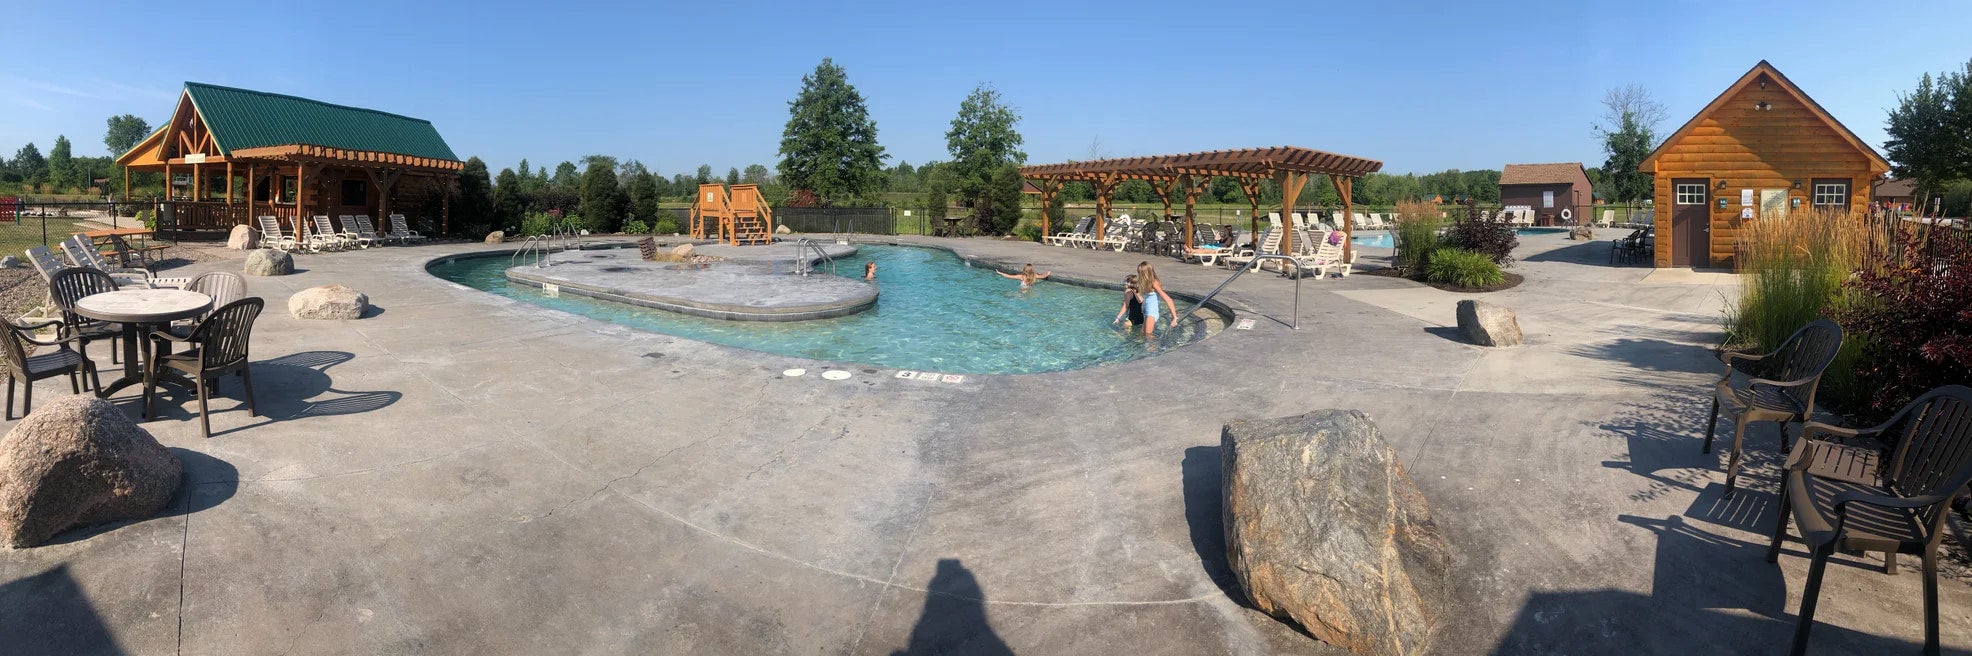 Lagoon pool surrounded by cabins and lawn chairs at Branches of Niagara Campground.